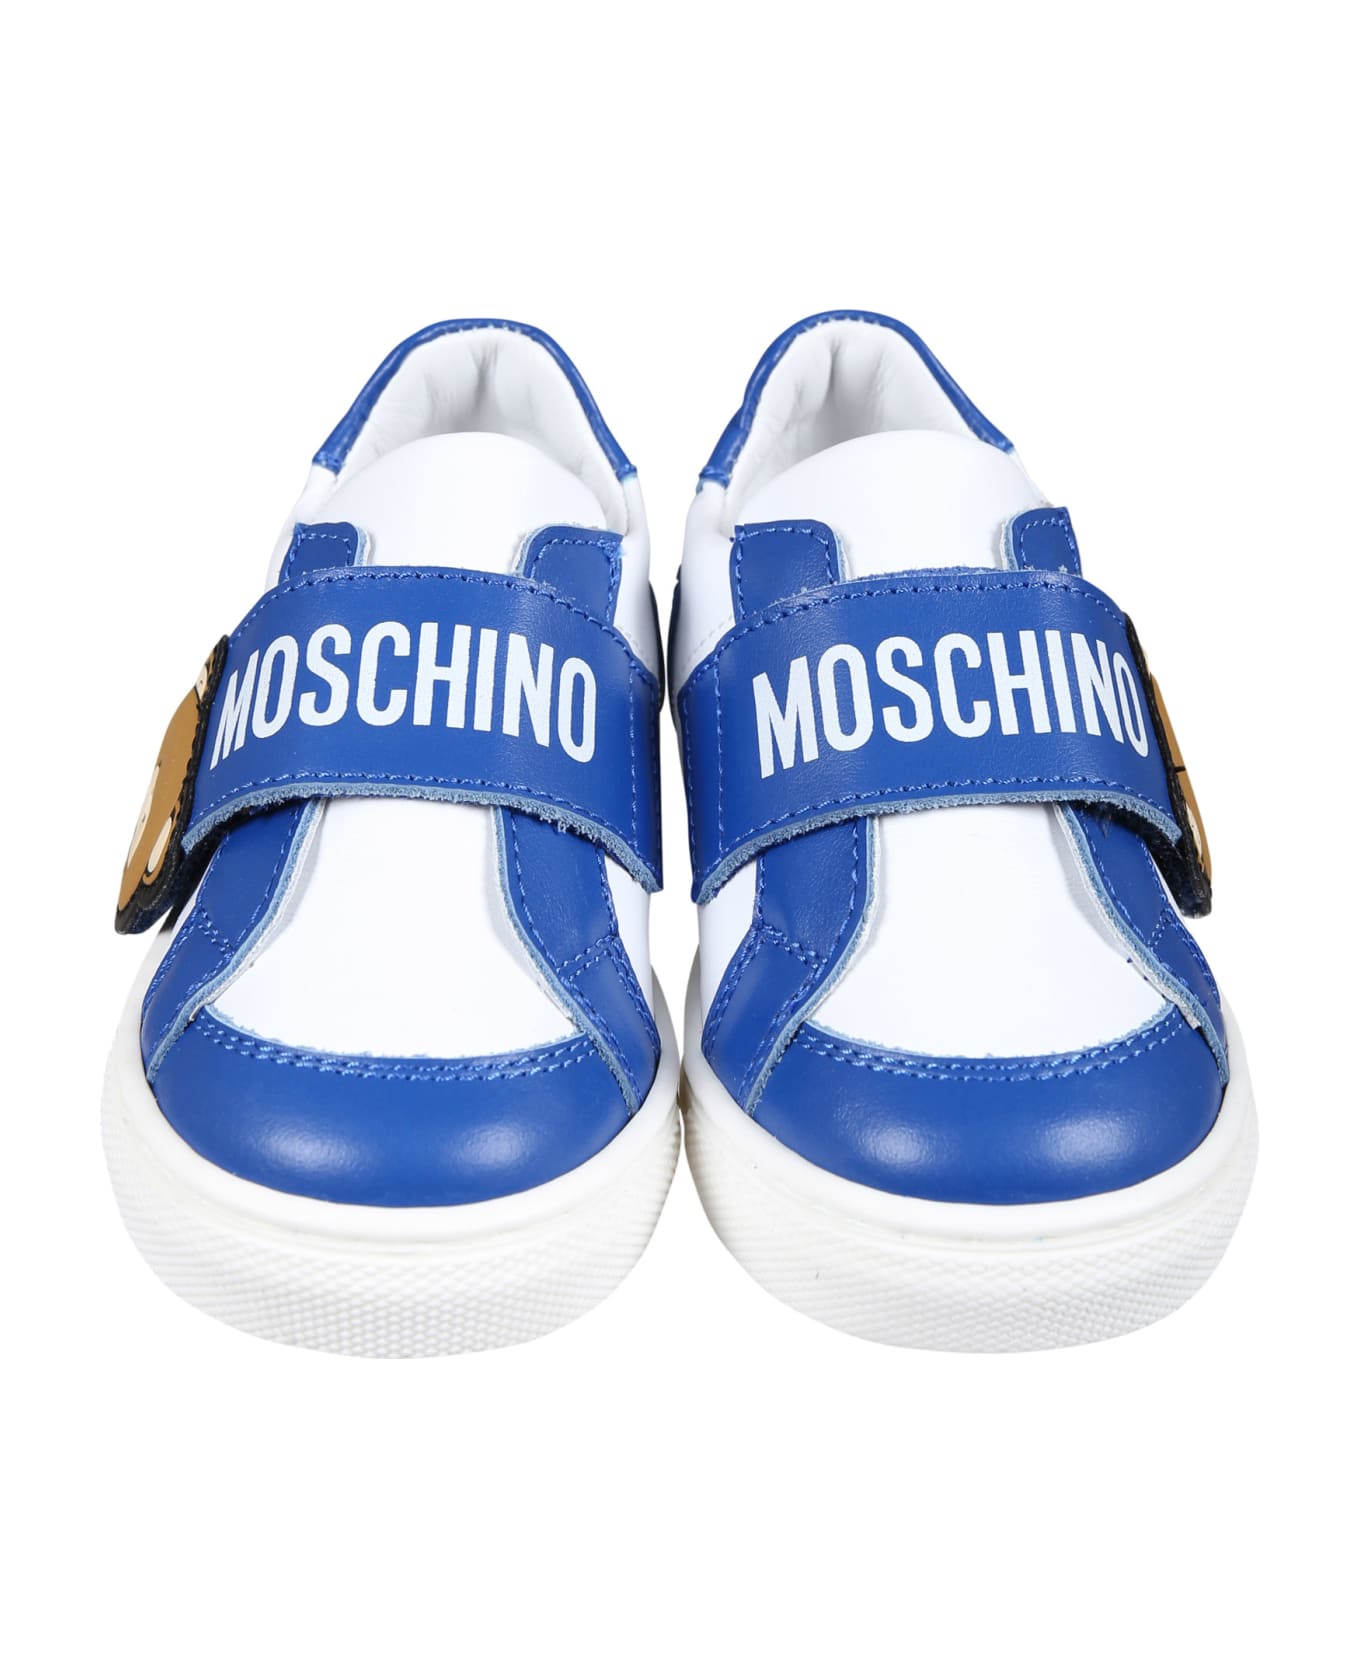 Moschino Light Blue Sneakers For Boy With Tedy Bear - Light Blue